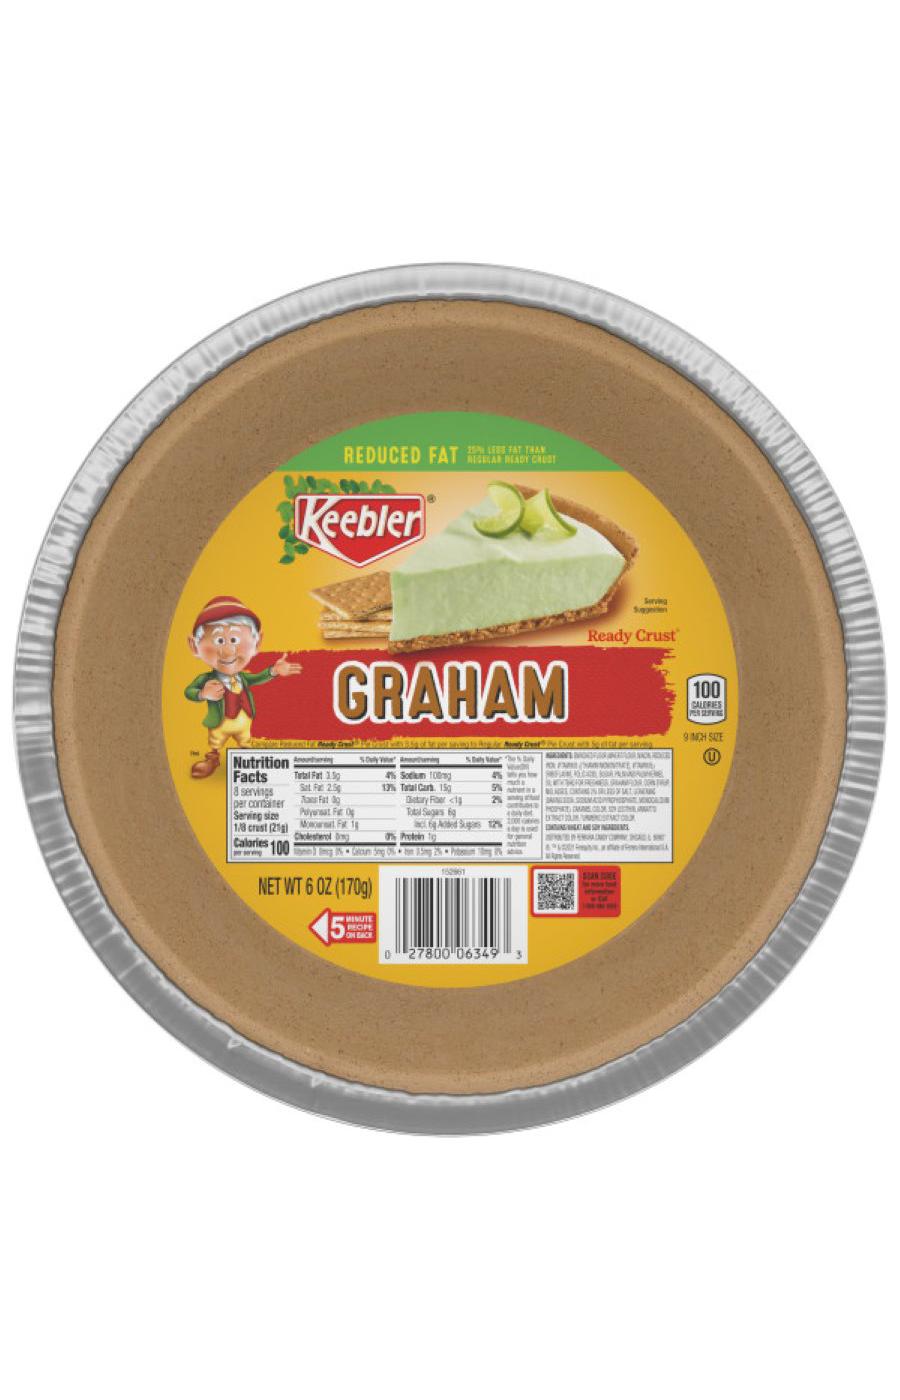 Keebler Reduced Fat Graham Ready Pie Crust; image 1 of 3